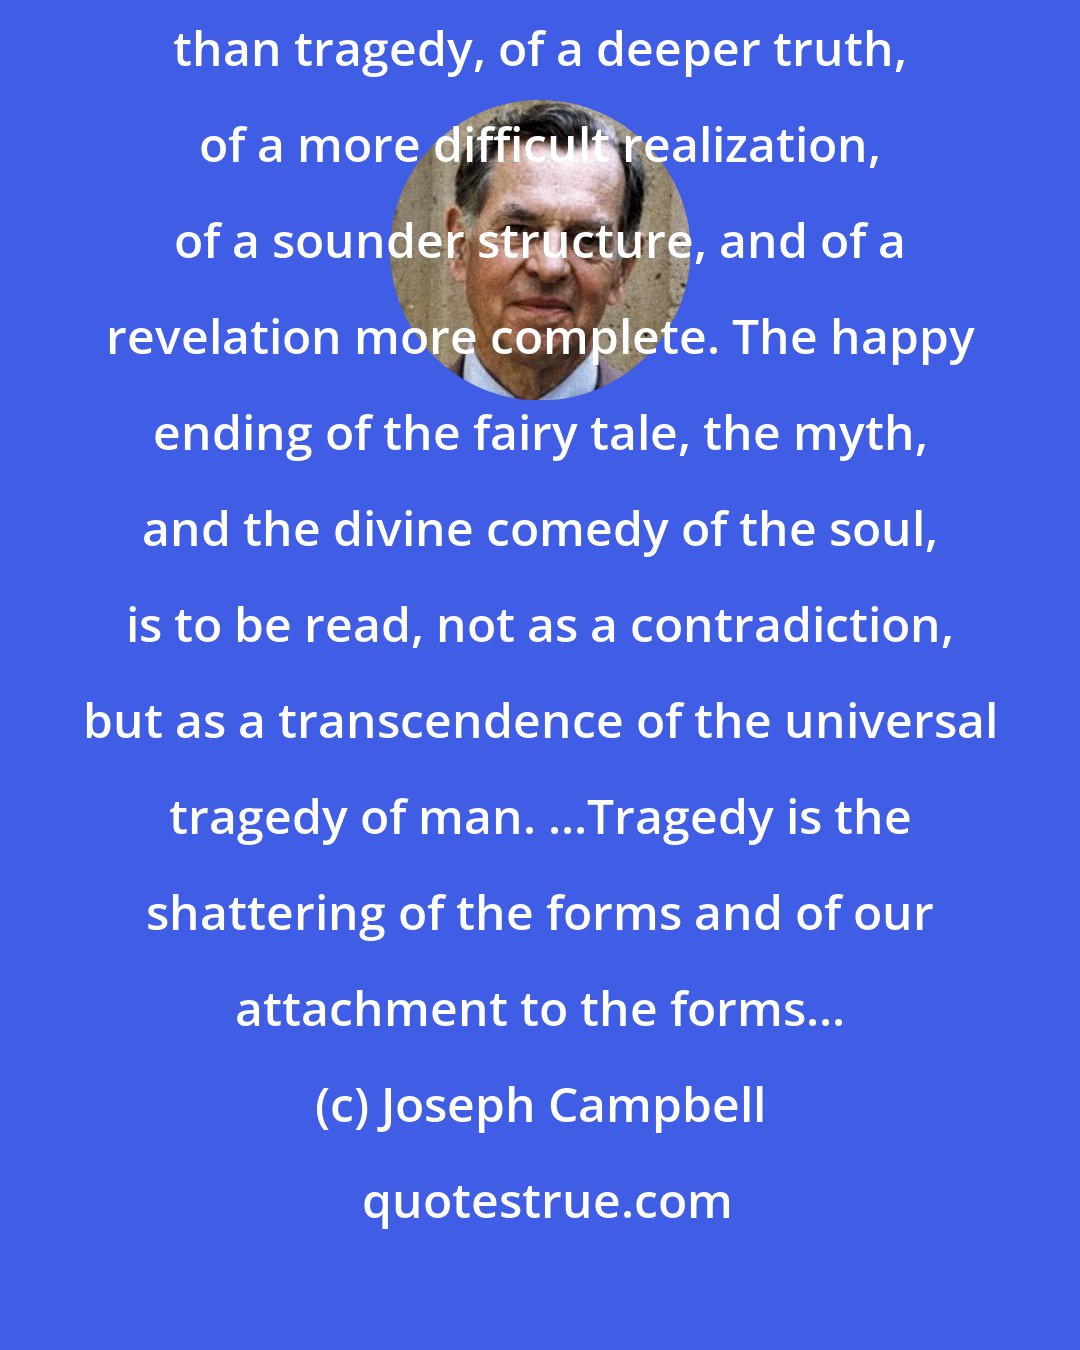 Joseph Campbell: [Comedies], in the ancient world, were regarded as of a higher rank than tragedy, of a deeper truth, of a more difficult realization, of a sounder structure, and of a revelation more complete. The happy ending of the fairy tale, the myth, and the divine comedy of the soul, is to be read, not as a contradiction, but as a transcendence of the universal tragedy of man. ...Tragedy is the shattering of the forms and of our attachment to the forms...